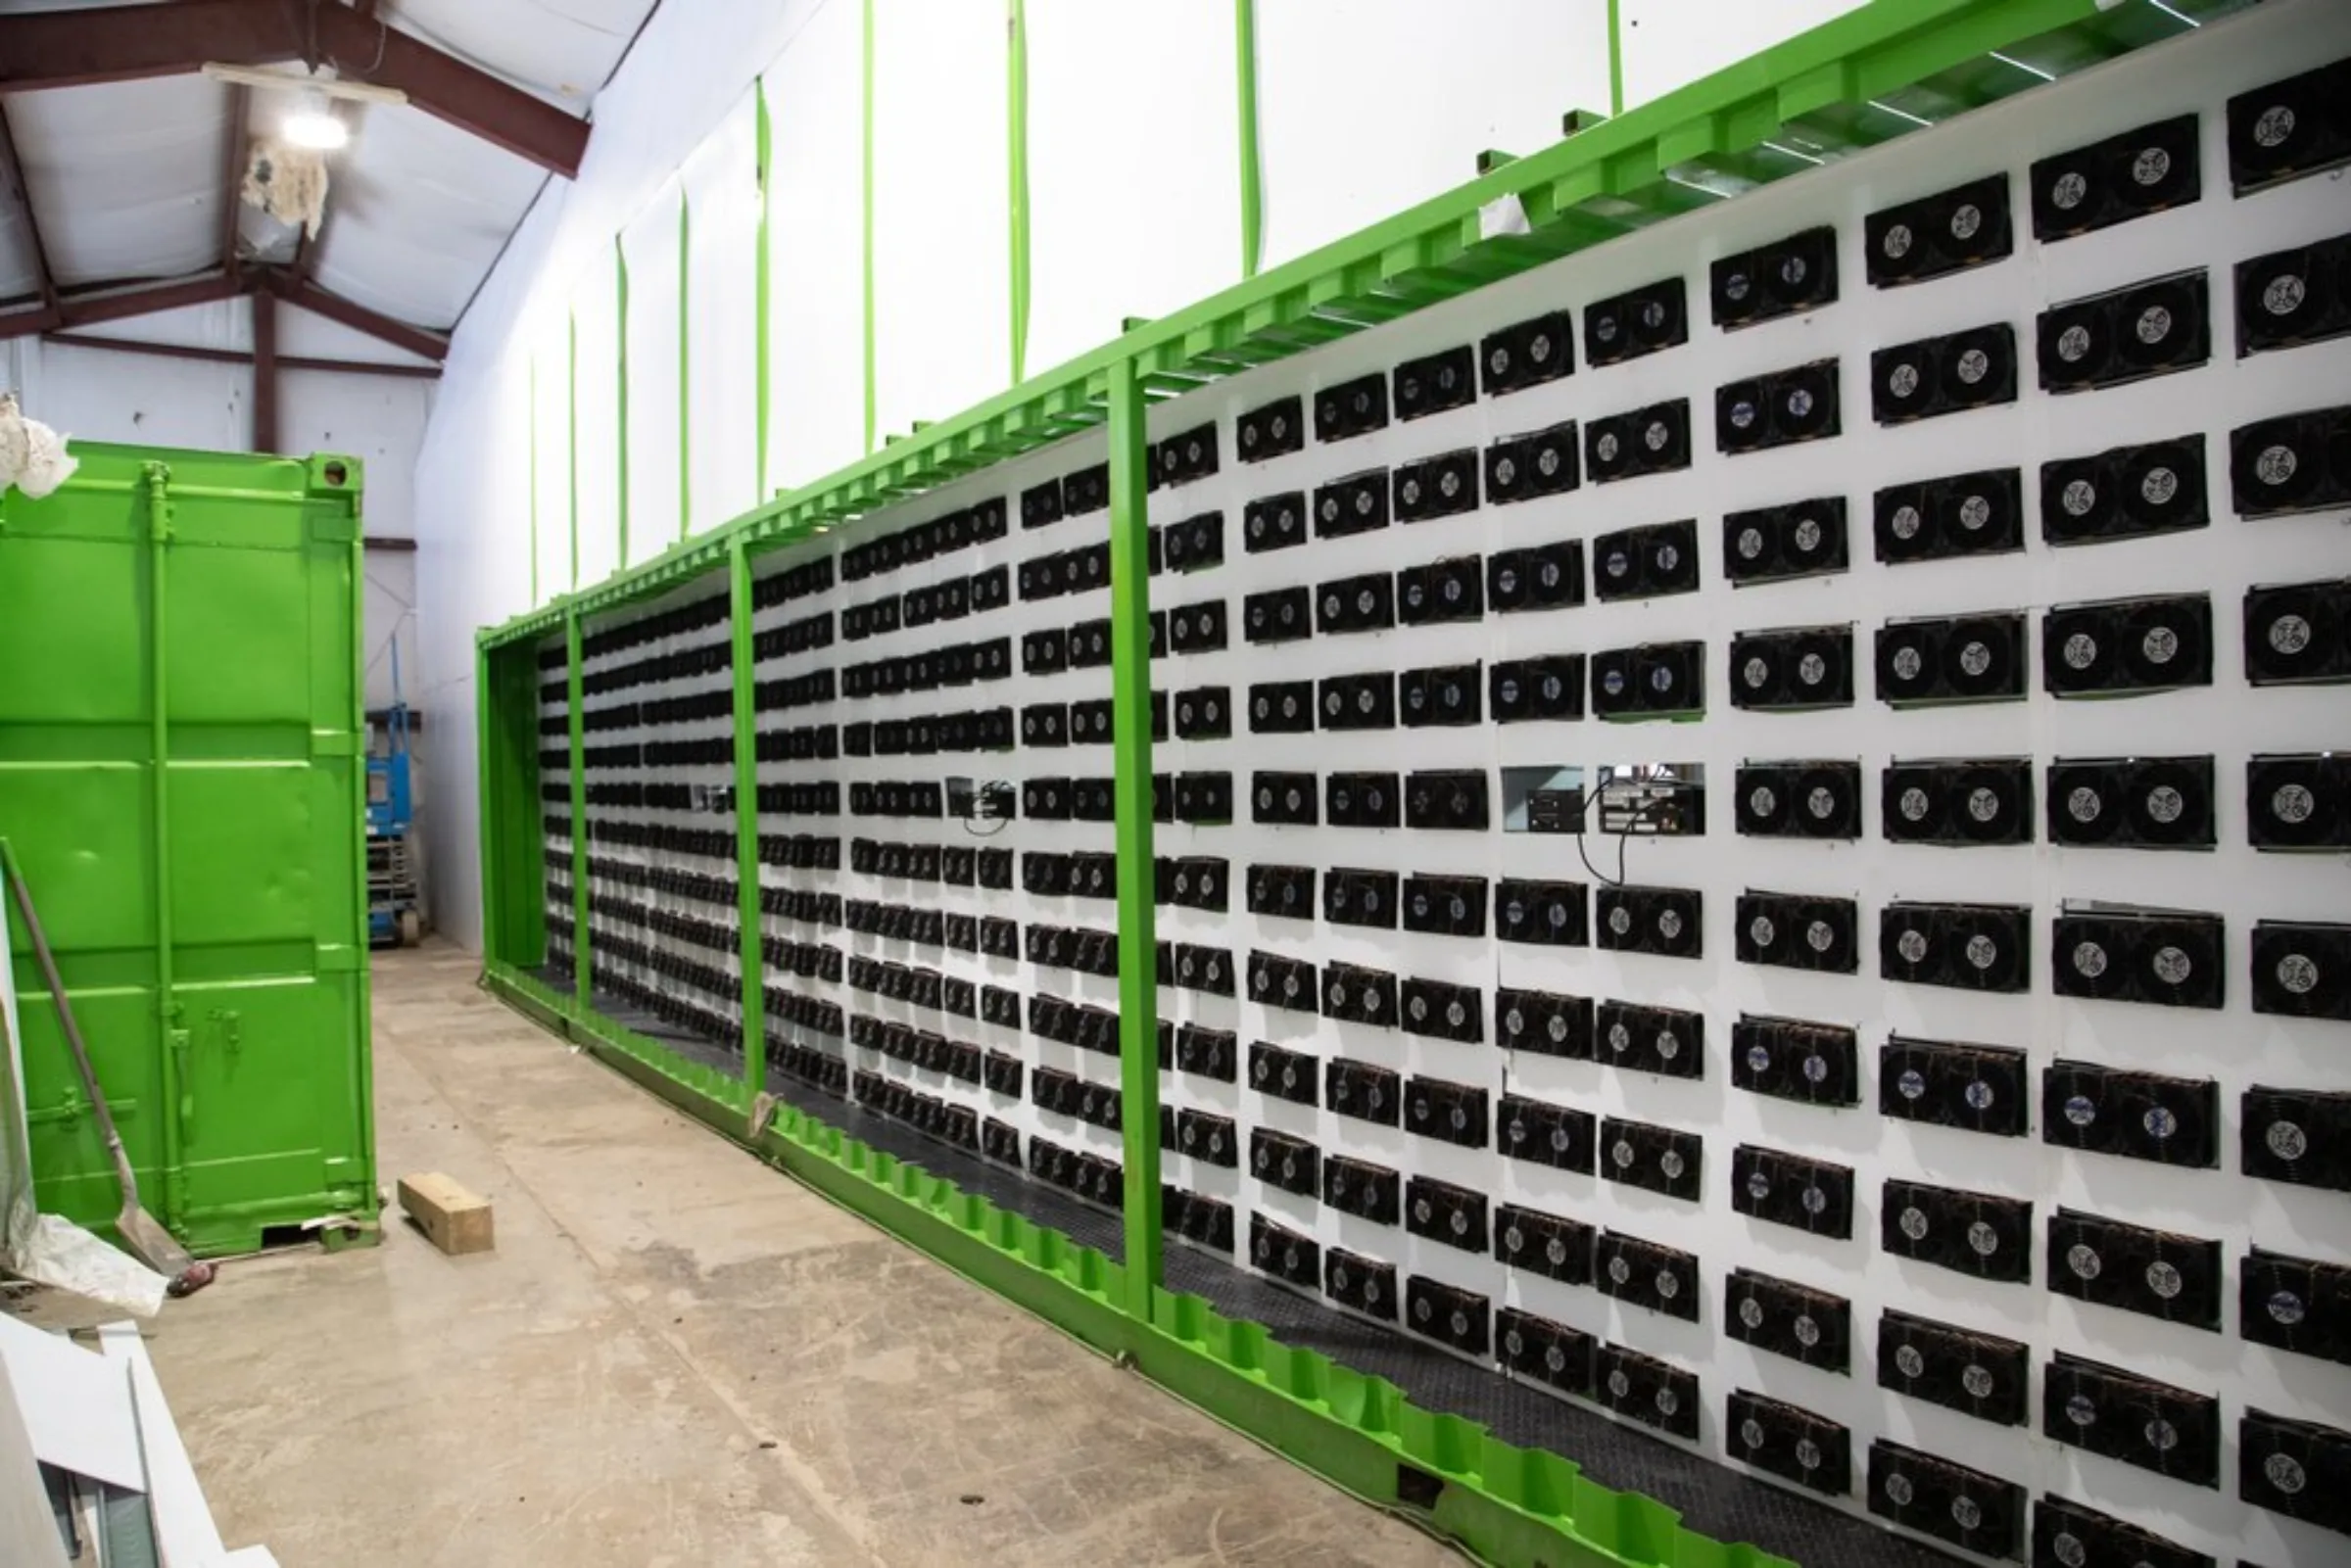 Mining rigs are being installed inside racks at Blockware Solution's new crypto mining site in Belfry, Kentucky, January 24, 2022. Thomson Reuters Foundation/Amira Karaoud